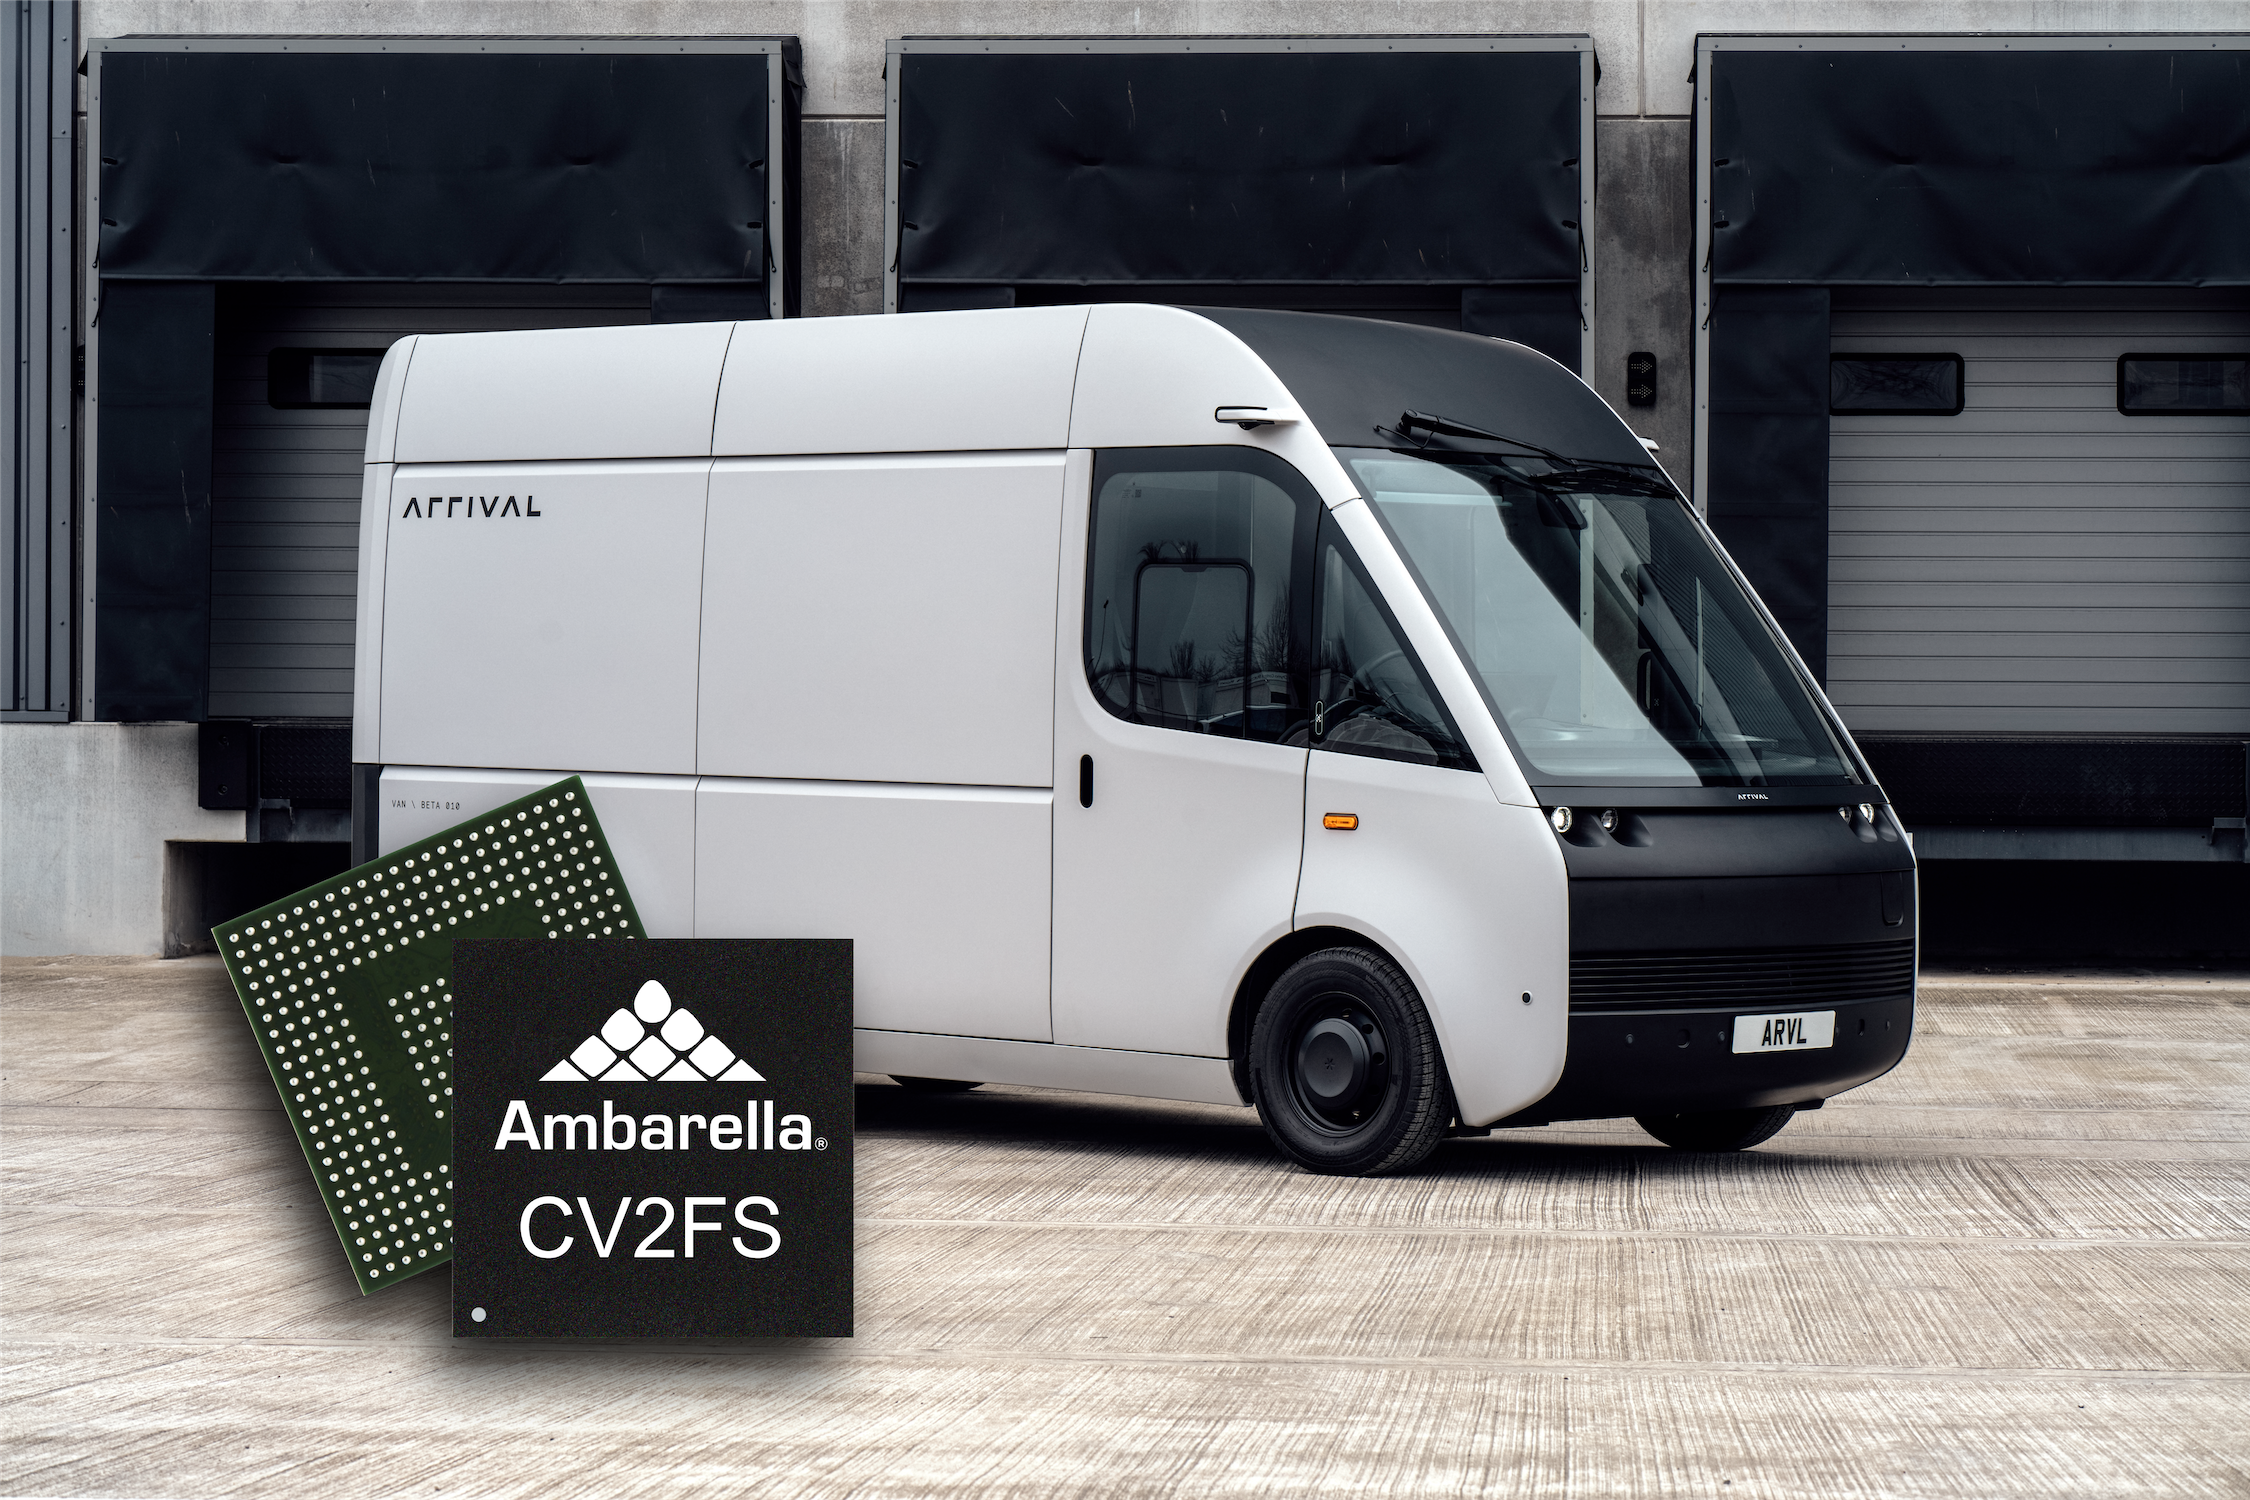 Electric vehicle pioneer Arrival selects Ambarella’s CVflow® AI vision SoC to enable autonomous driving and ADAS features in the Arrival Bus and Van.